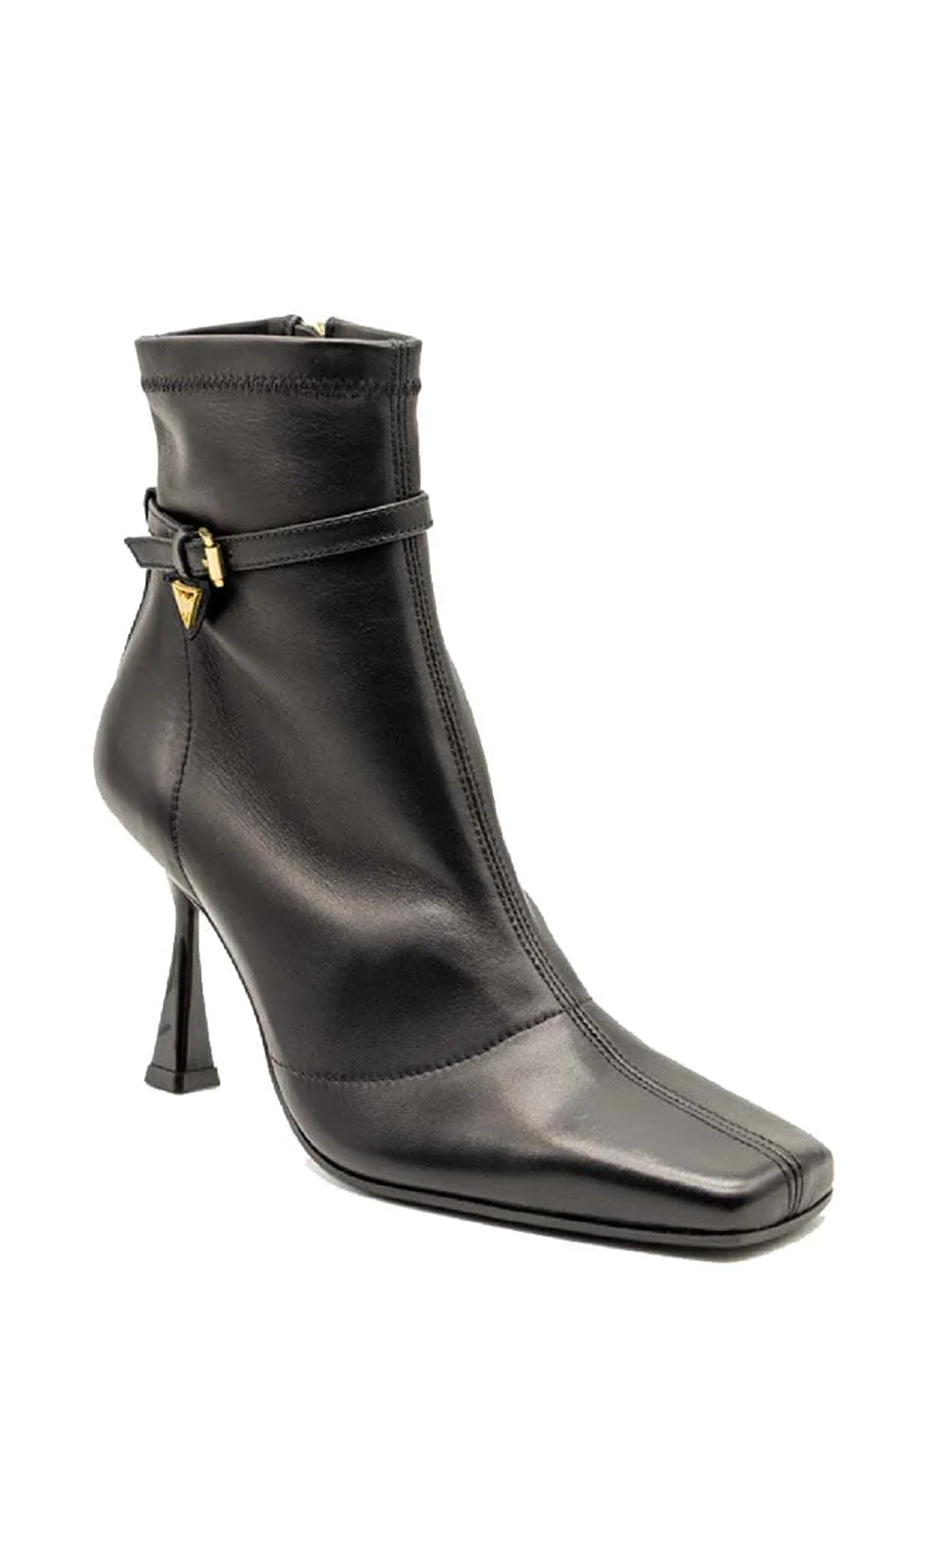 miguel vieira stretch leather boots